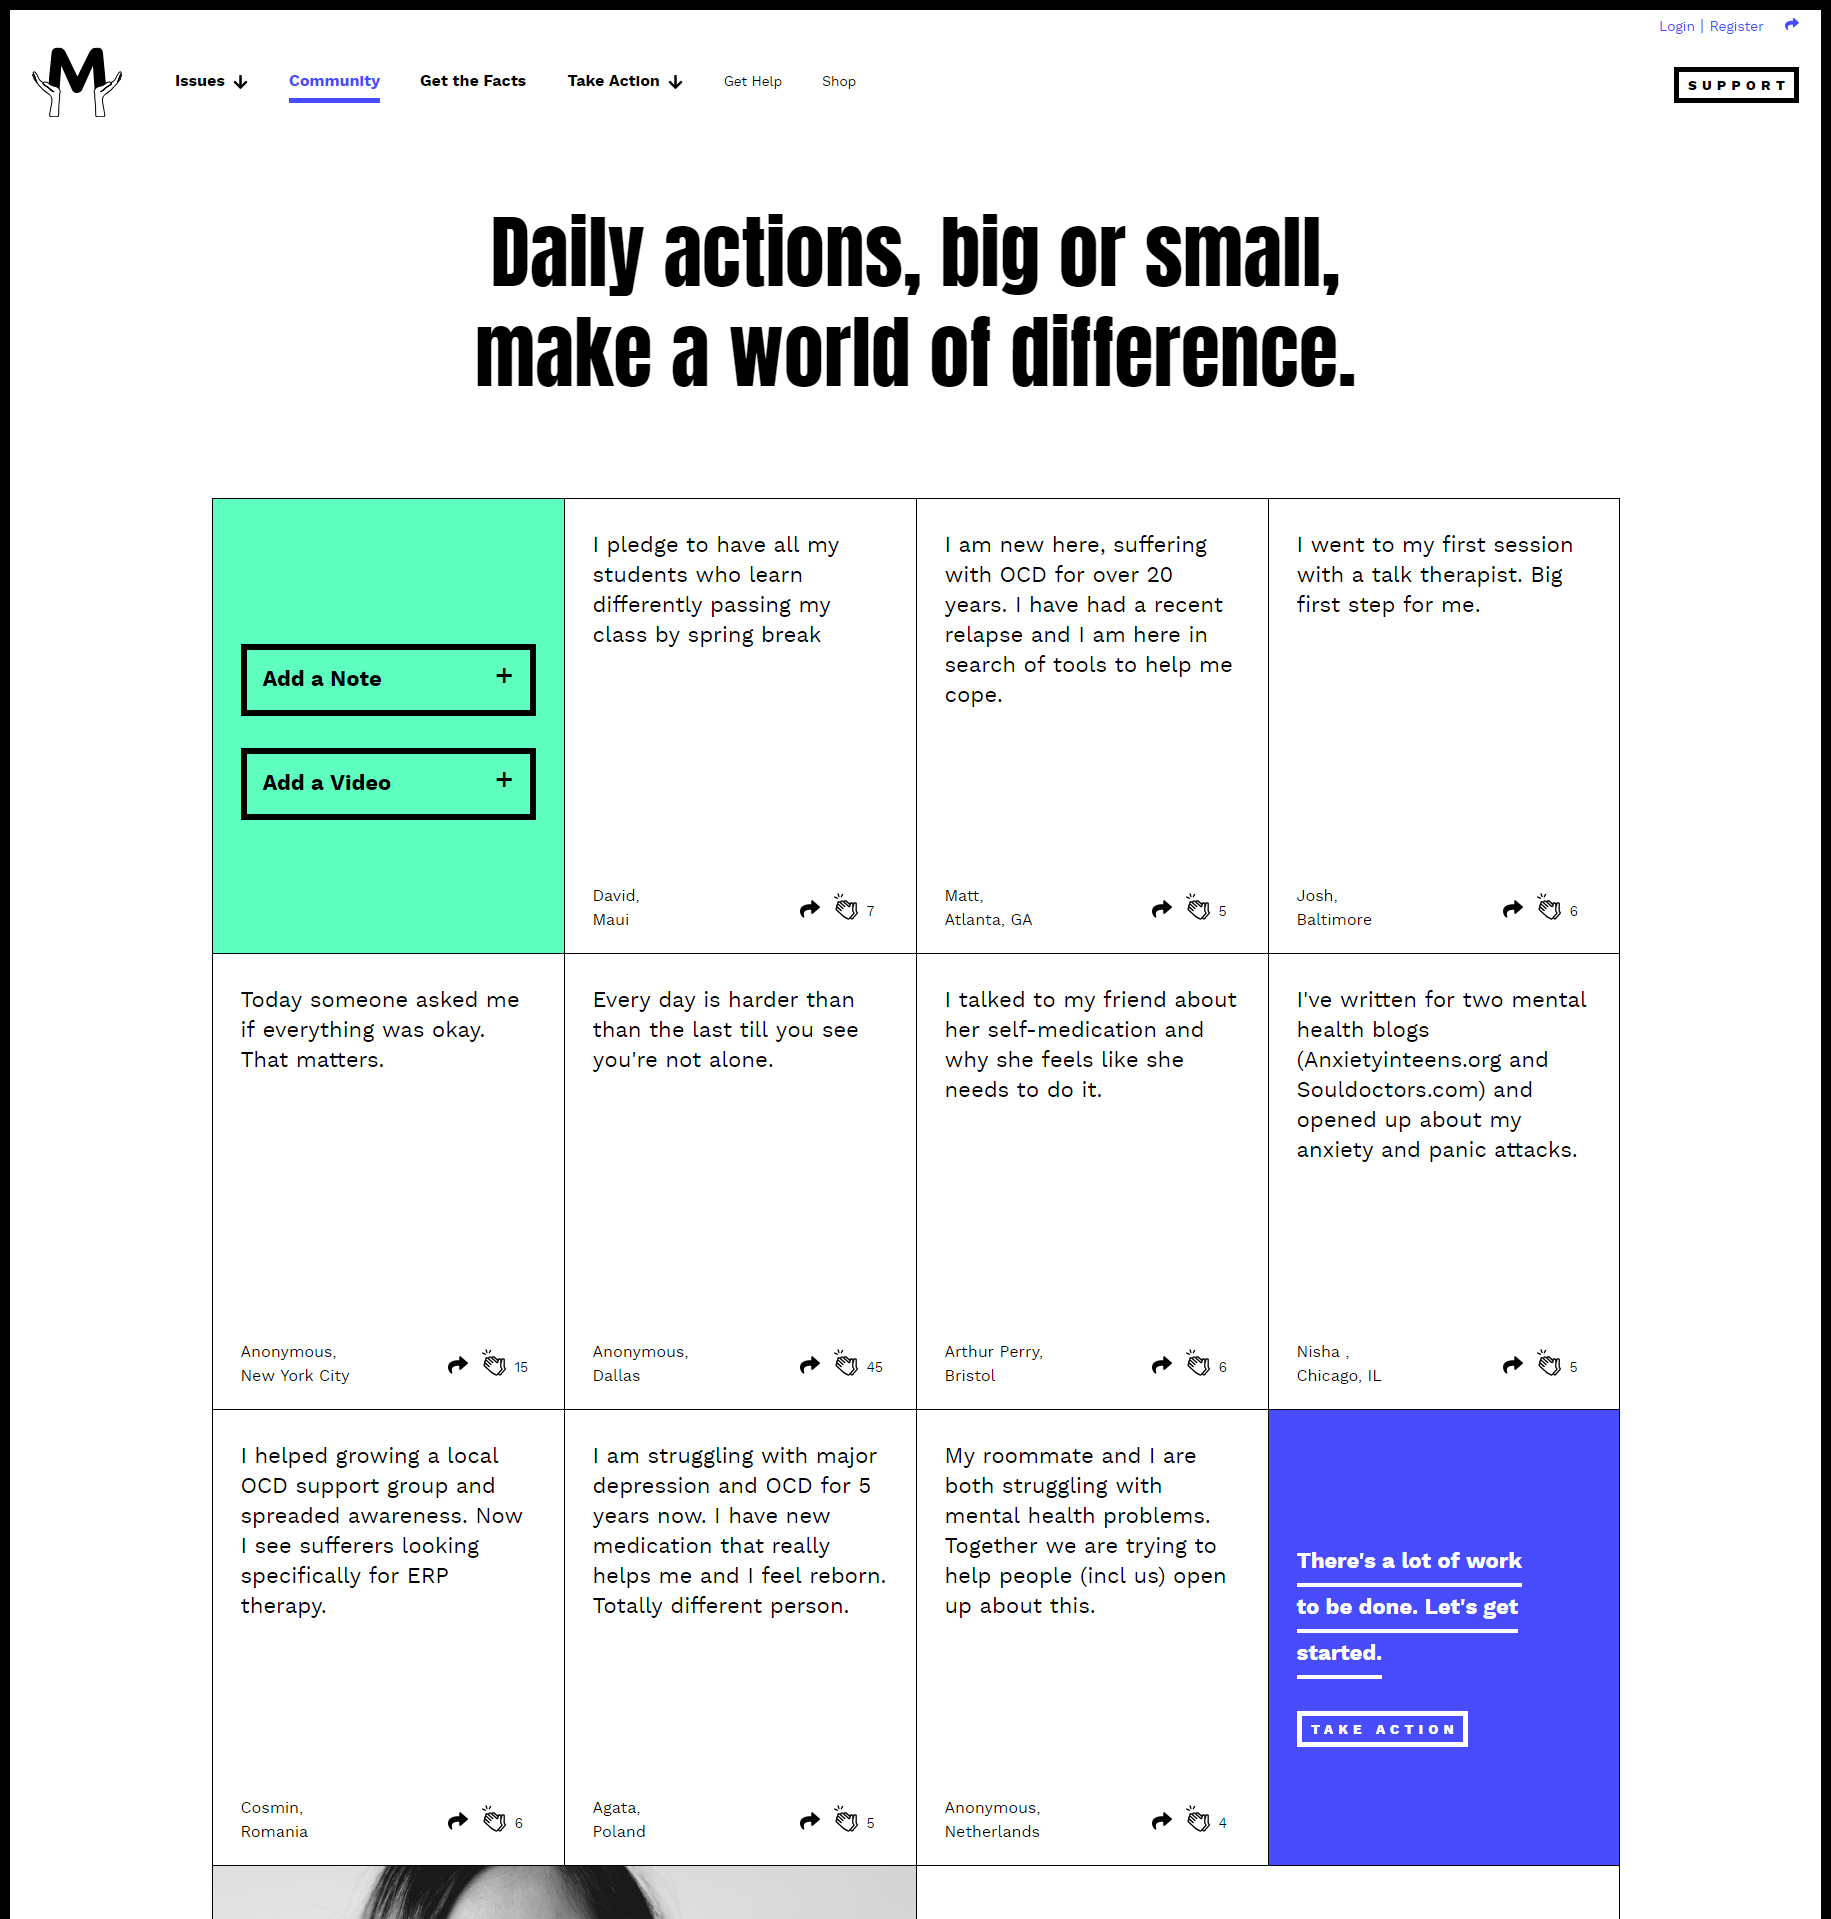 Made of Millions - Website of the Day